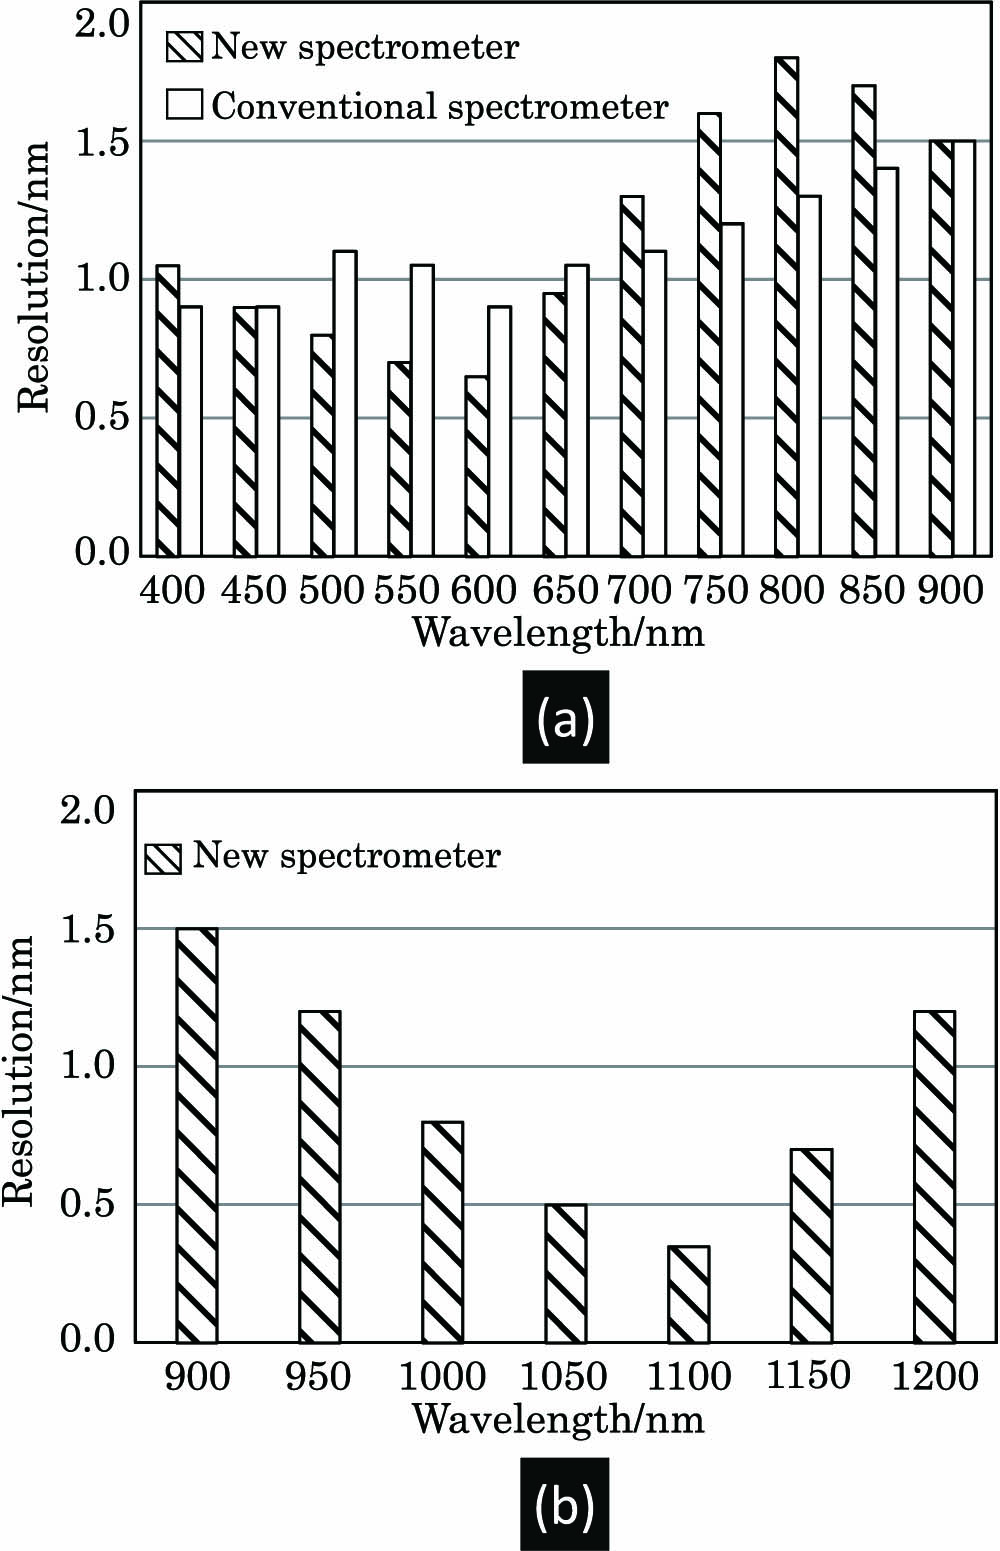 Simulated spectral bands and spectral resolutions in the whole slit. (a) Spectral resolutions of the two different types of spectrometers in the spectral range of 400–900 nm, and (b) spectral resolution of the new spectrometer in the spectral range of 900–1200 nm.